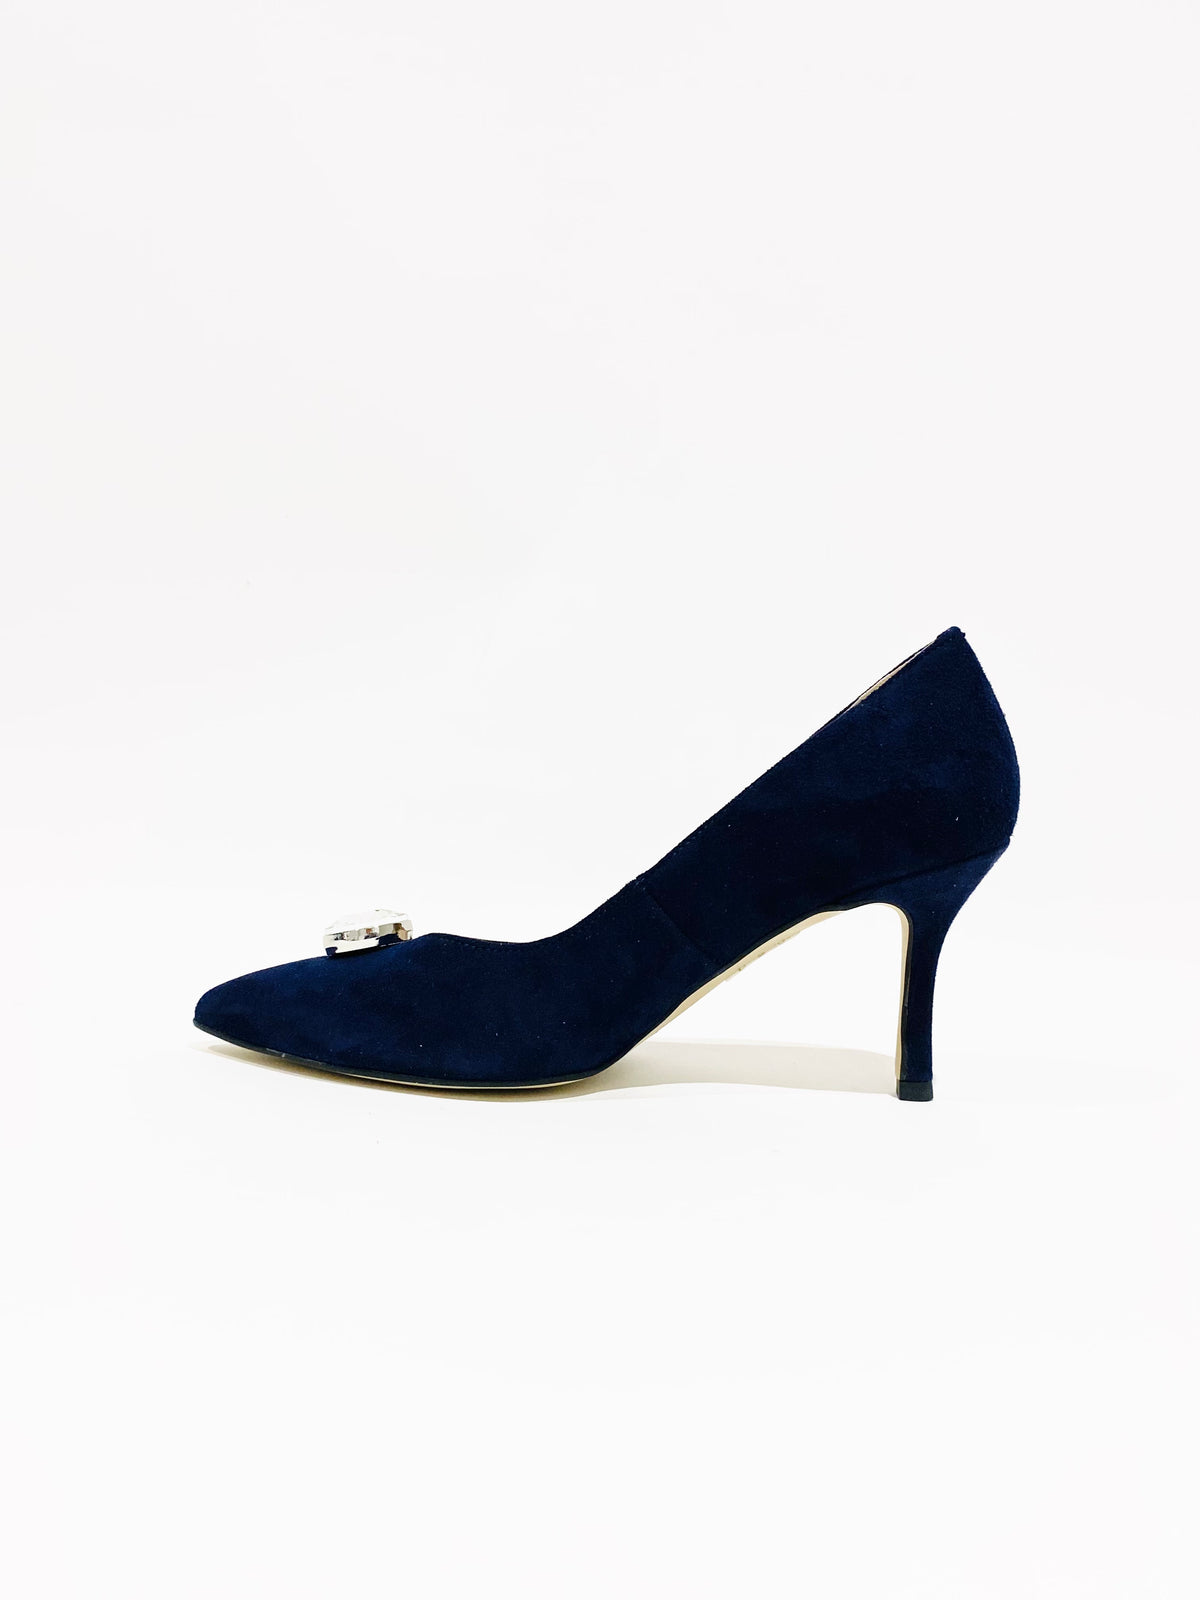 Rachels - Navy Suede Court with a Jewel